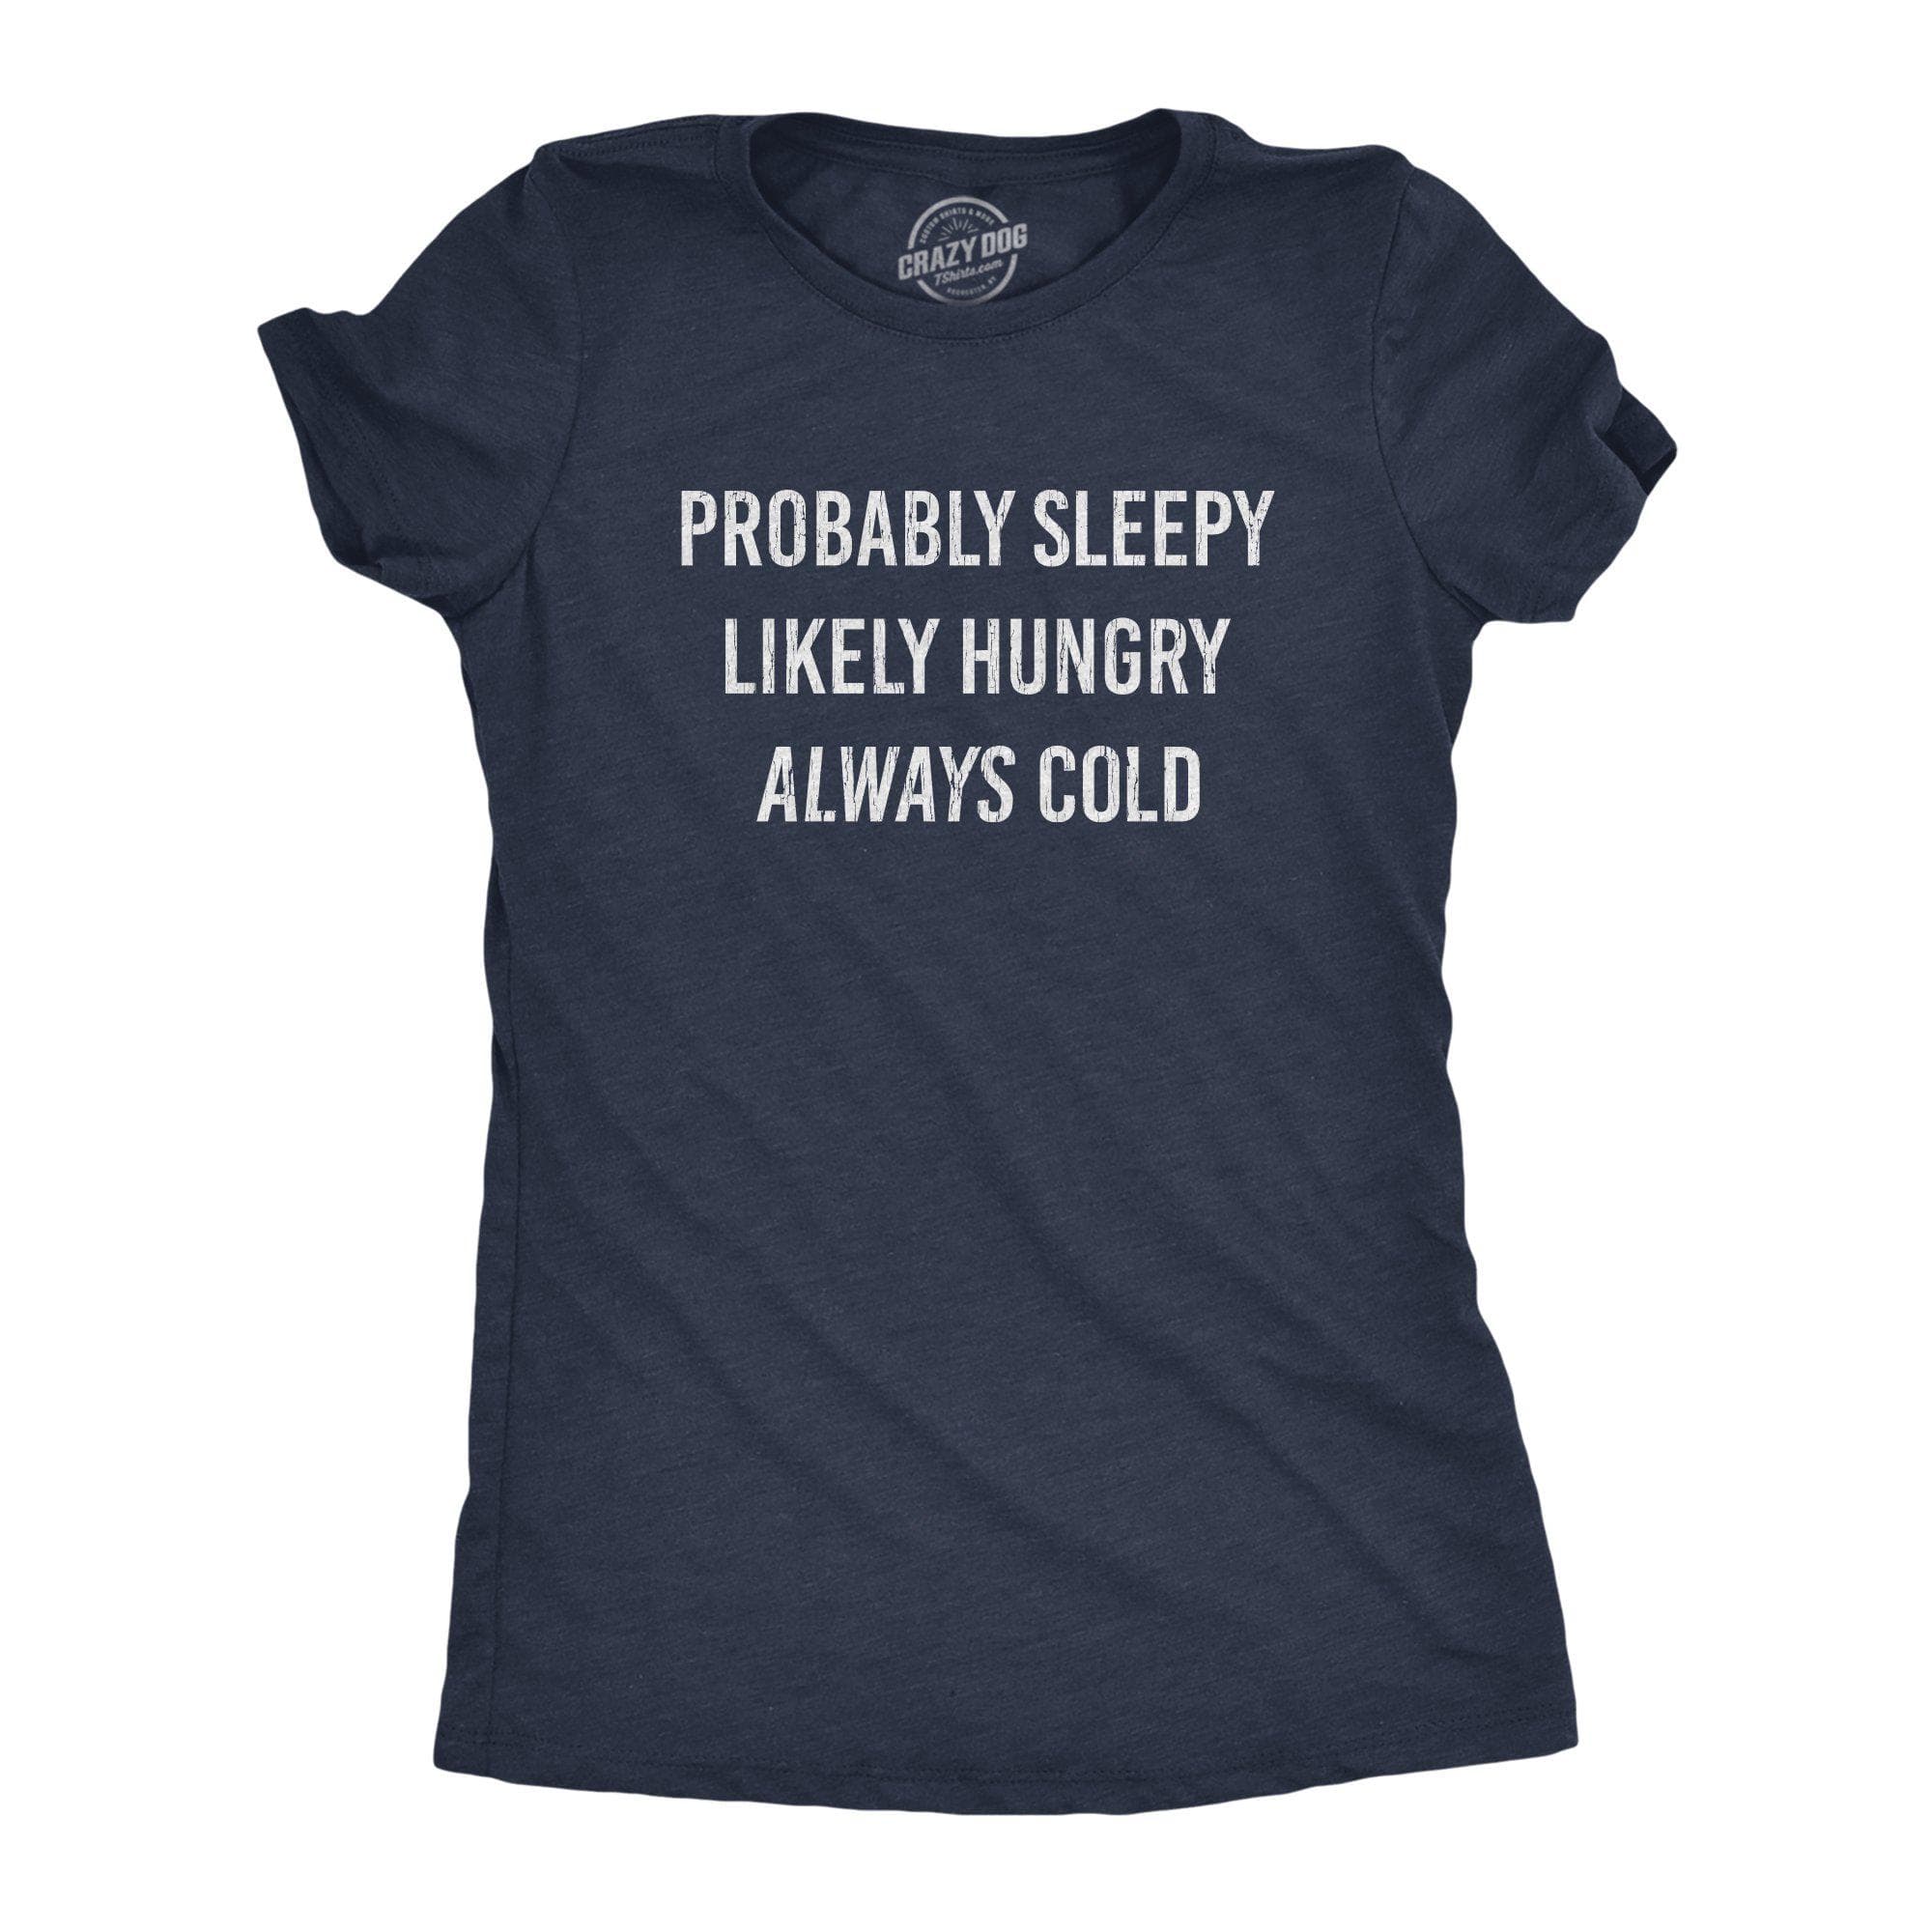 Probably Sleepy Likely Hungry Always Cold Women's Tshirt - Crazy Dog T-Shirts